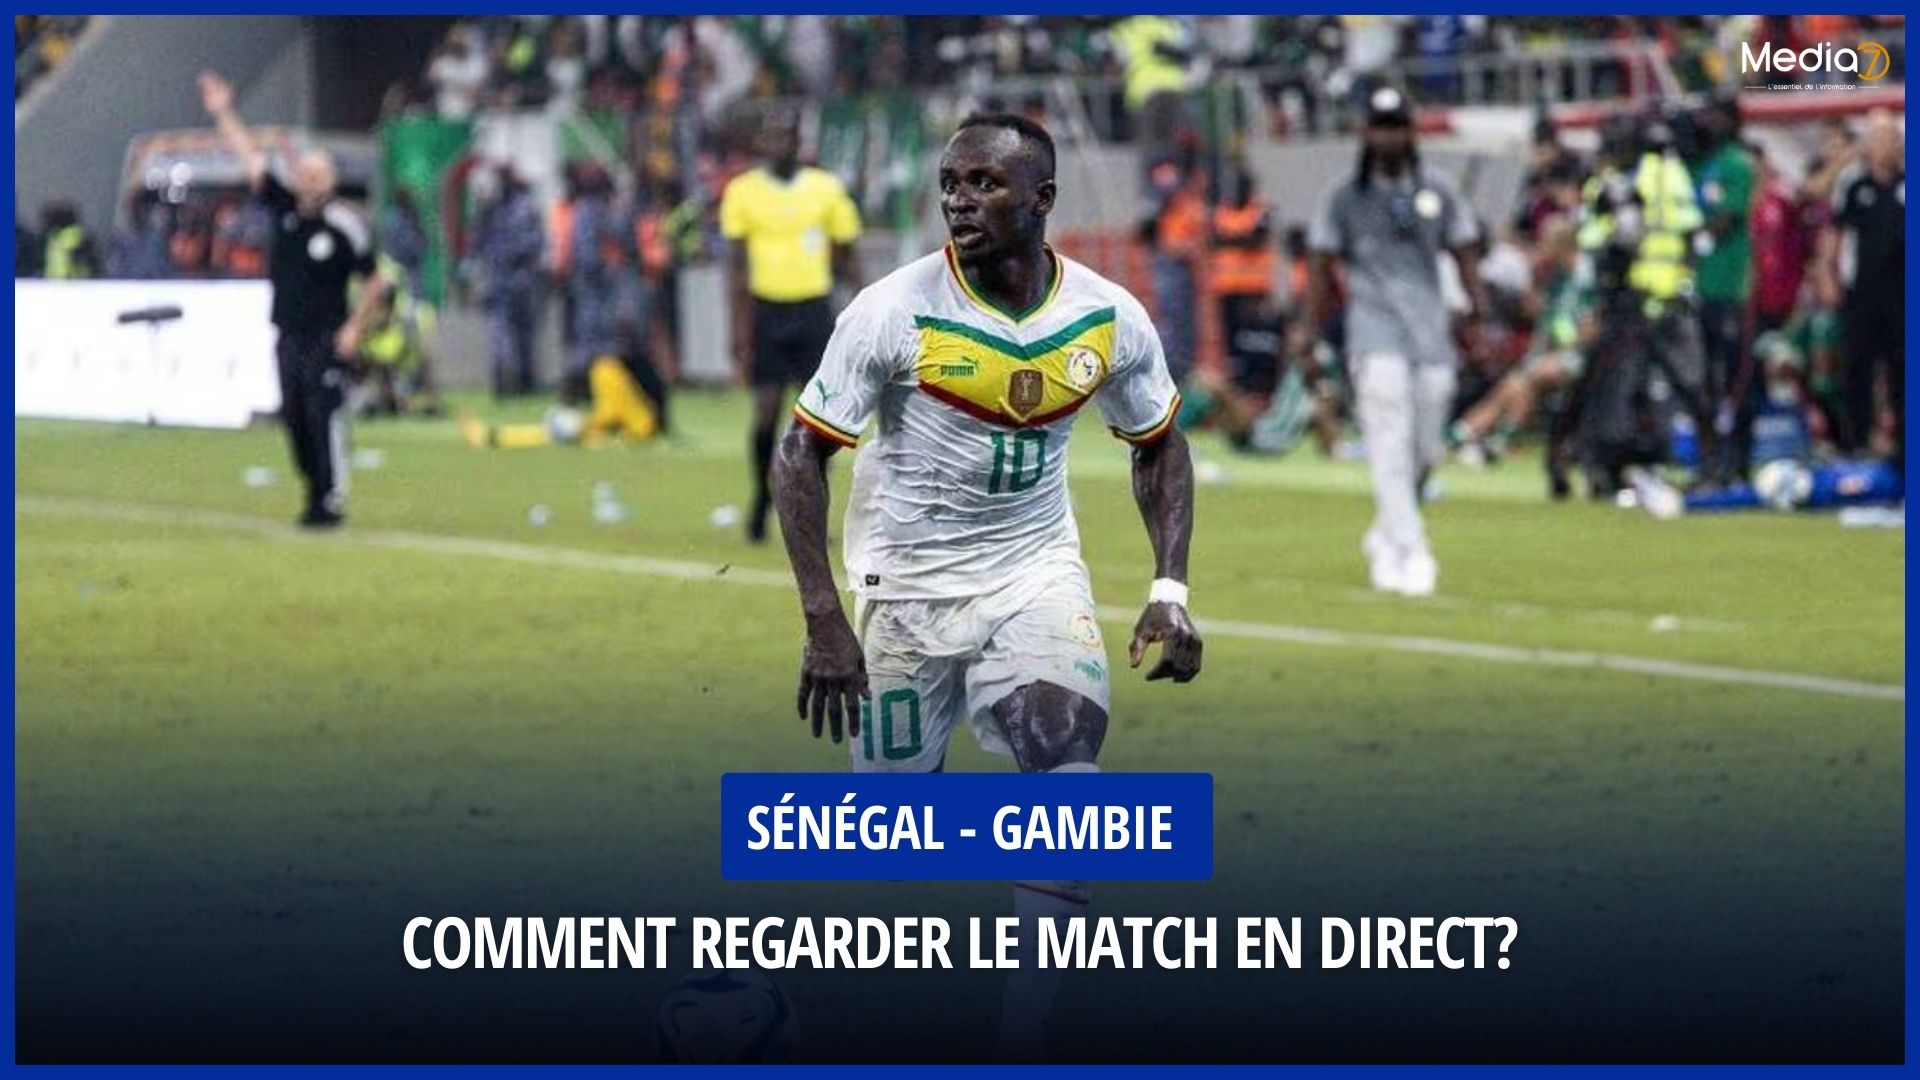 Senegal - Gambia live: the Senegalese already open the score, the match live! - Media7